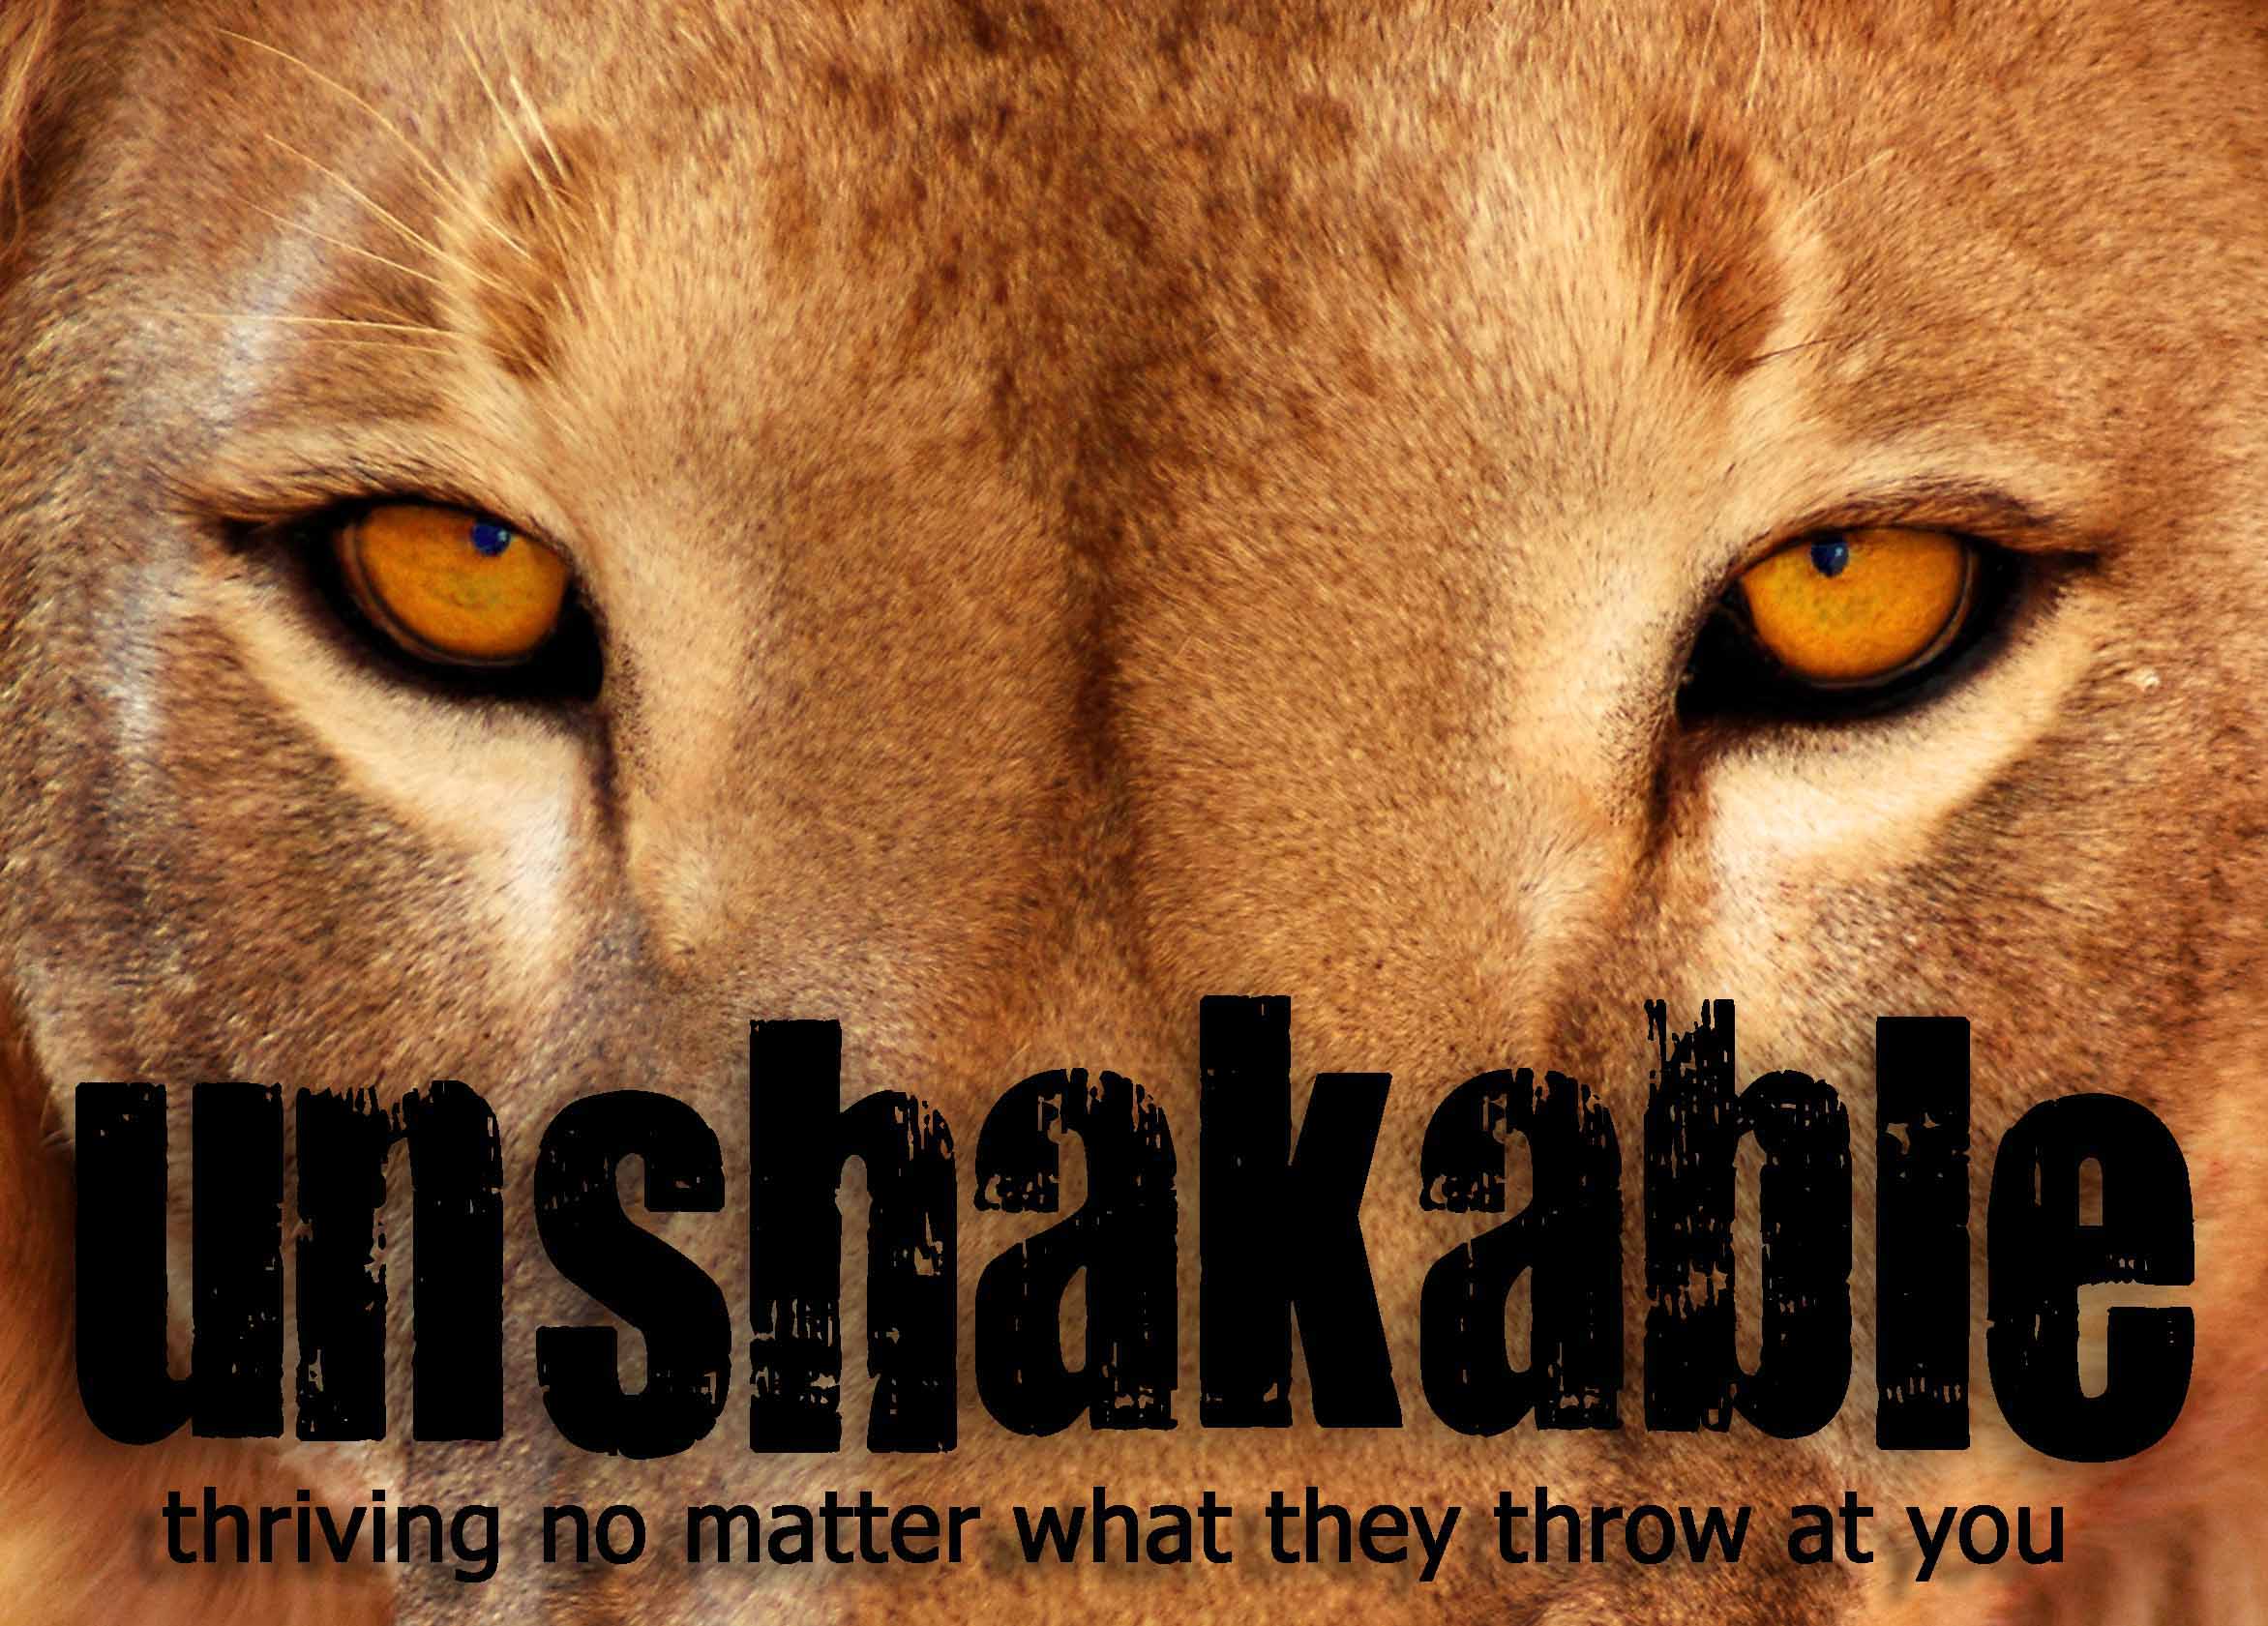 11-27-16 Unshakable - Thriving No Matter What They Throw At You - Part 9